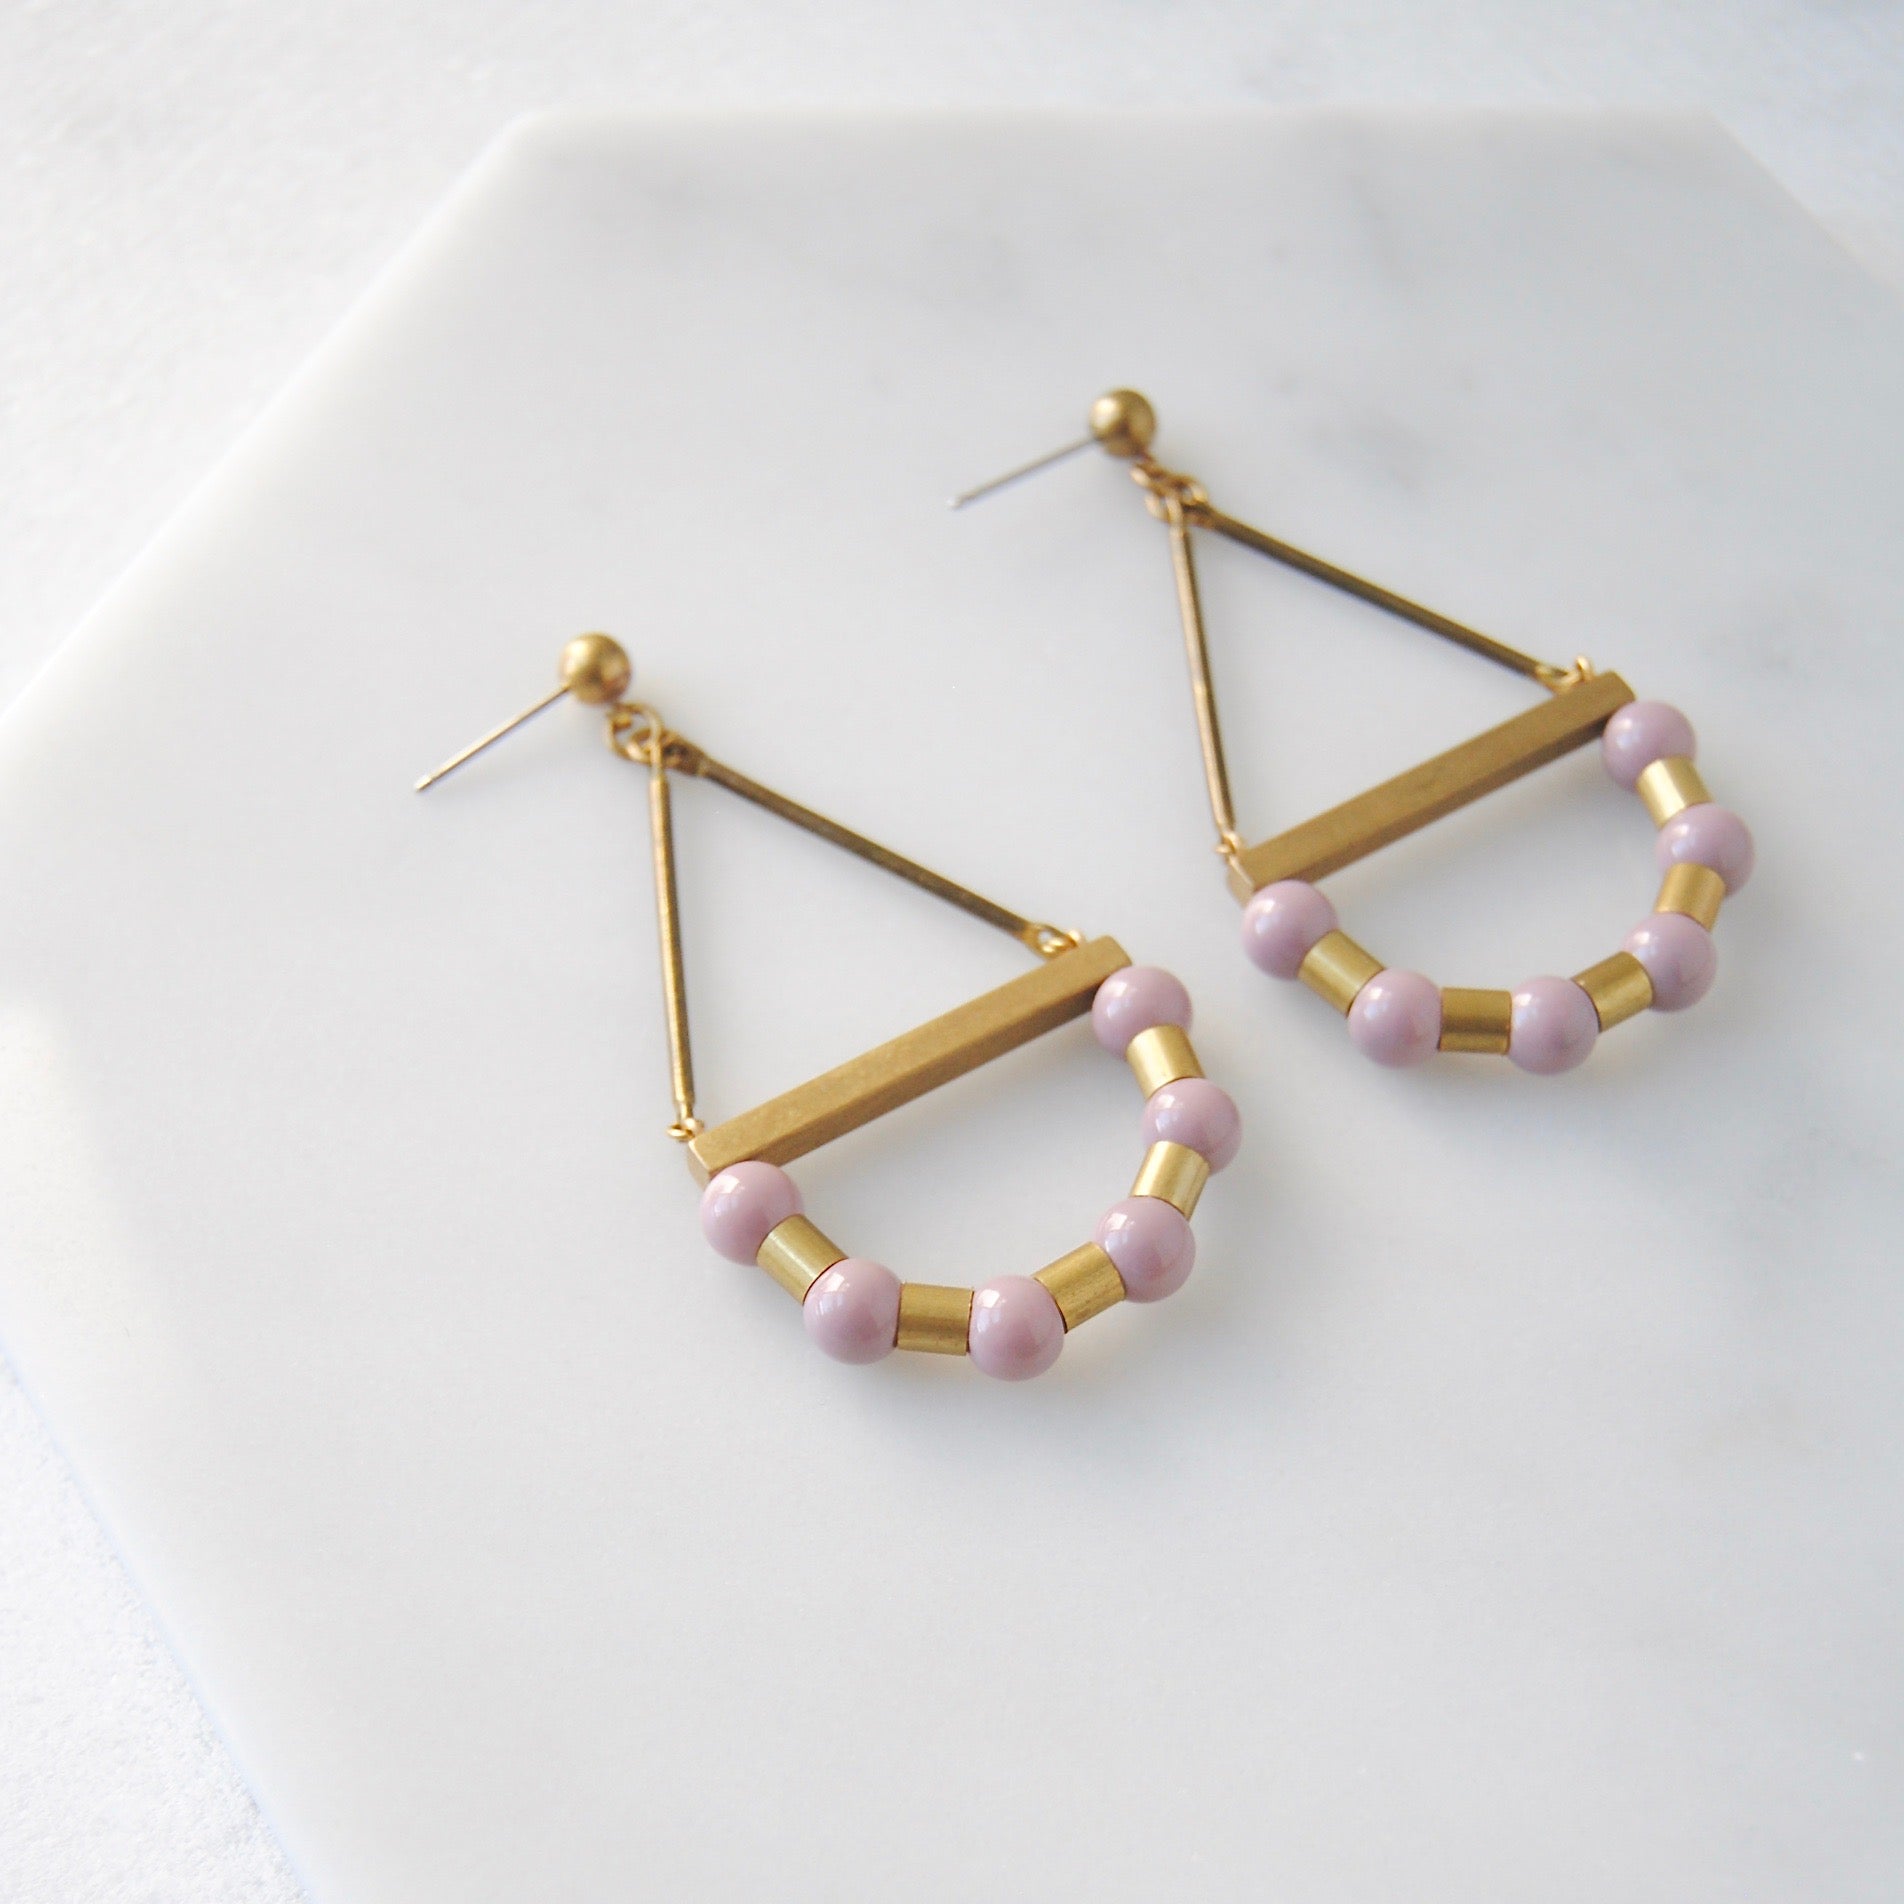 COLORFUL CURVE EARRINGS